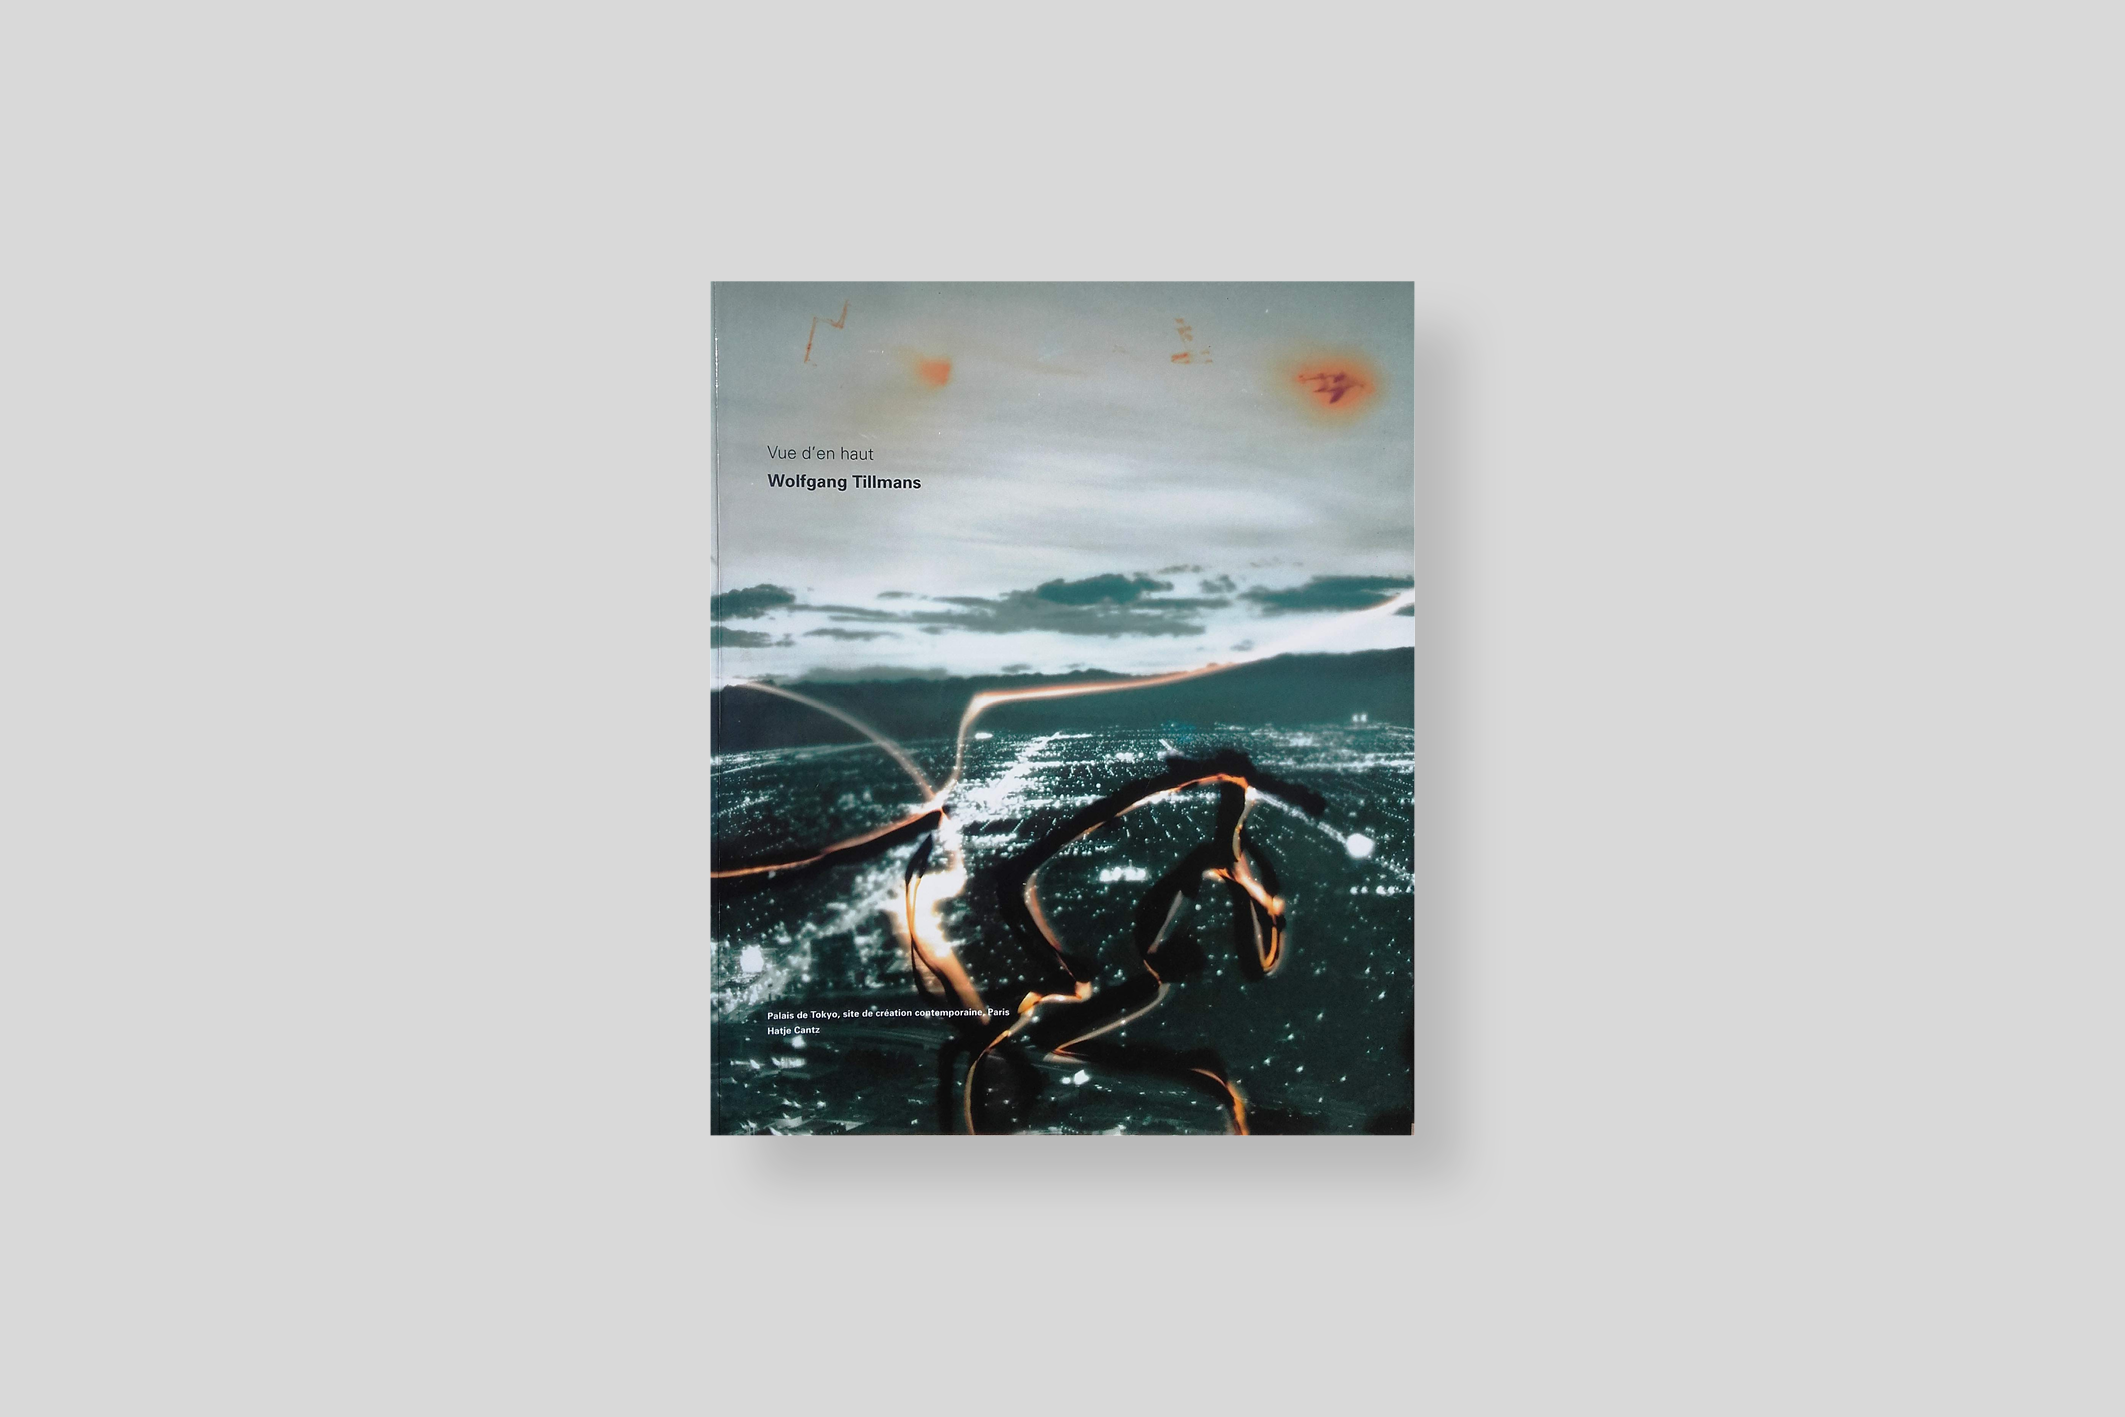 view-from-above-tillmans-hatje-cantz-cover